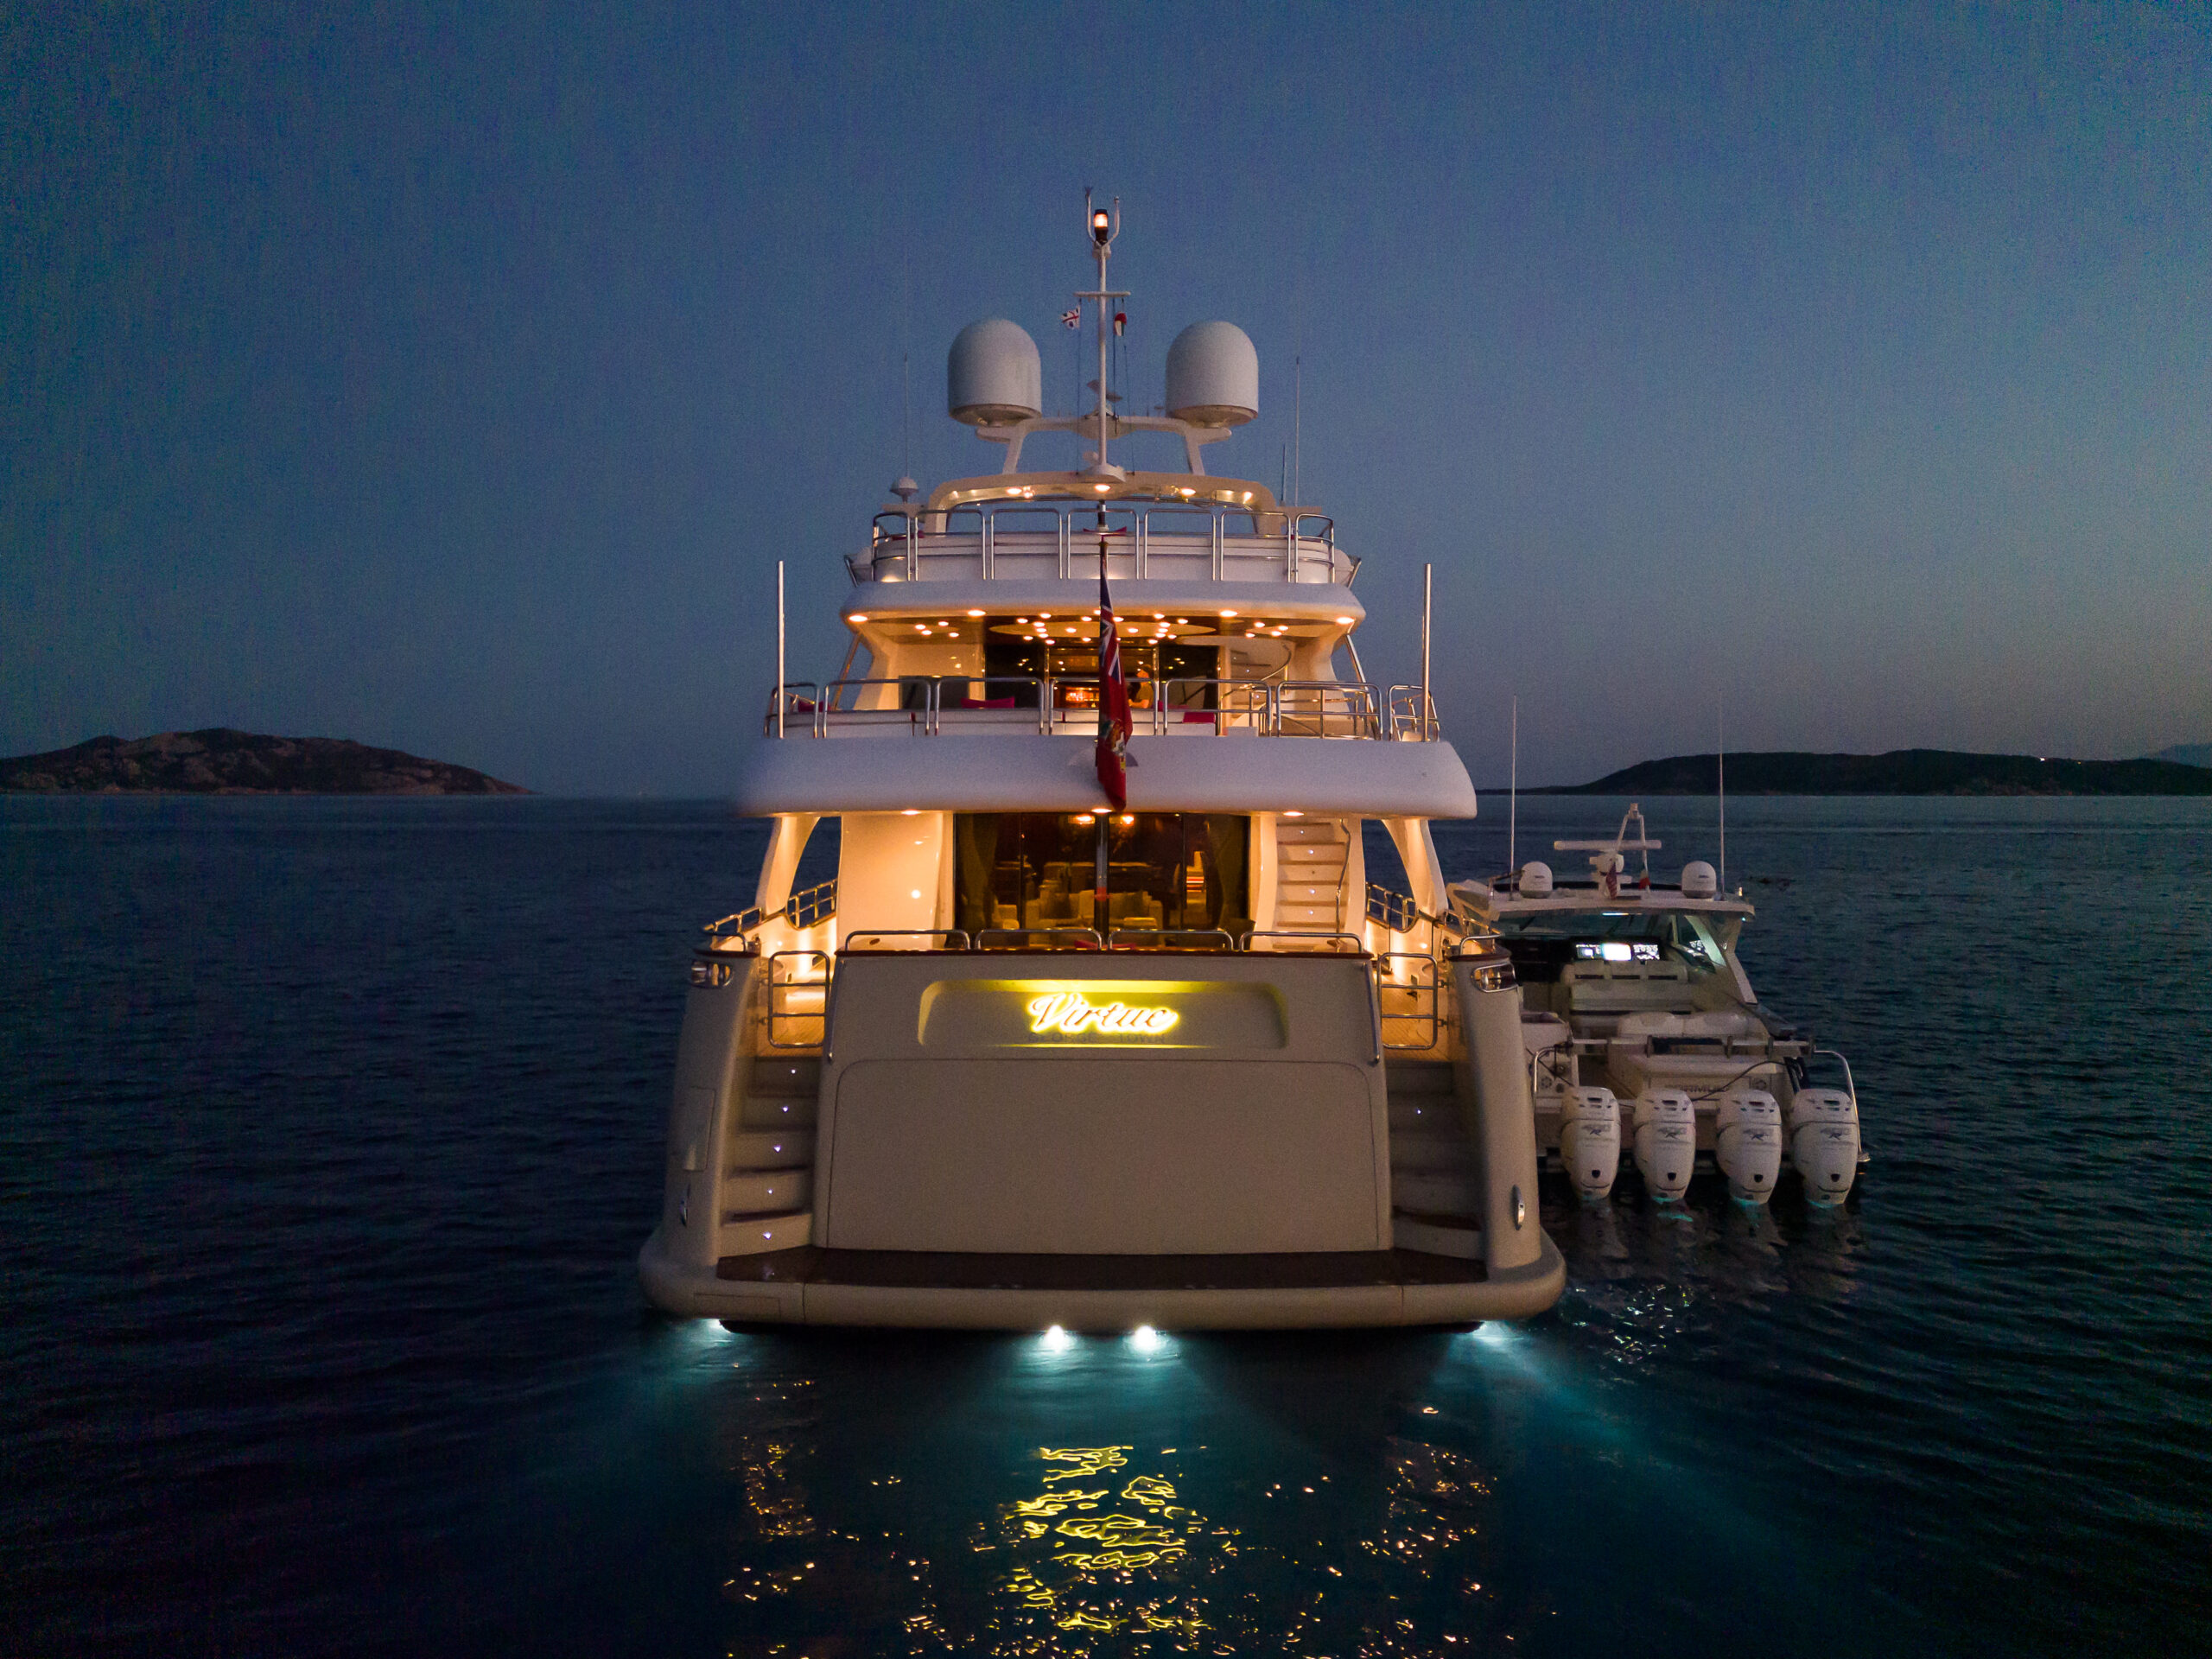 Moran Yachts is proud to charter the VIRTUE